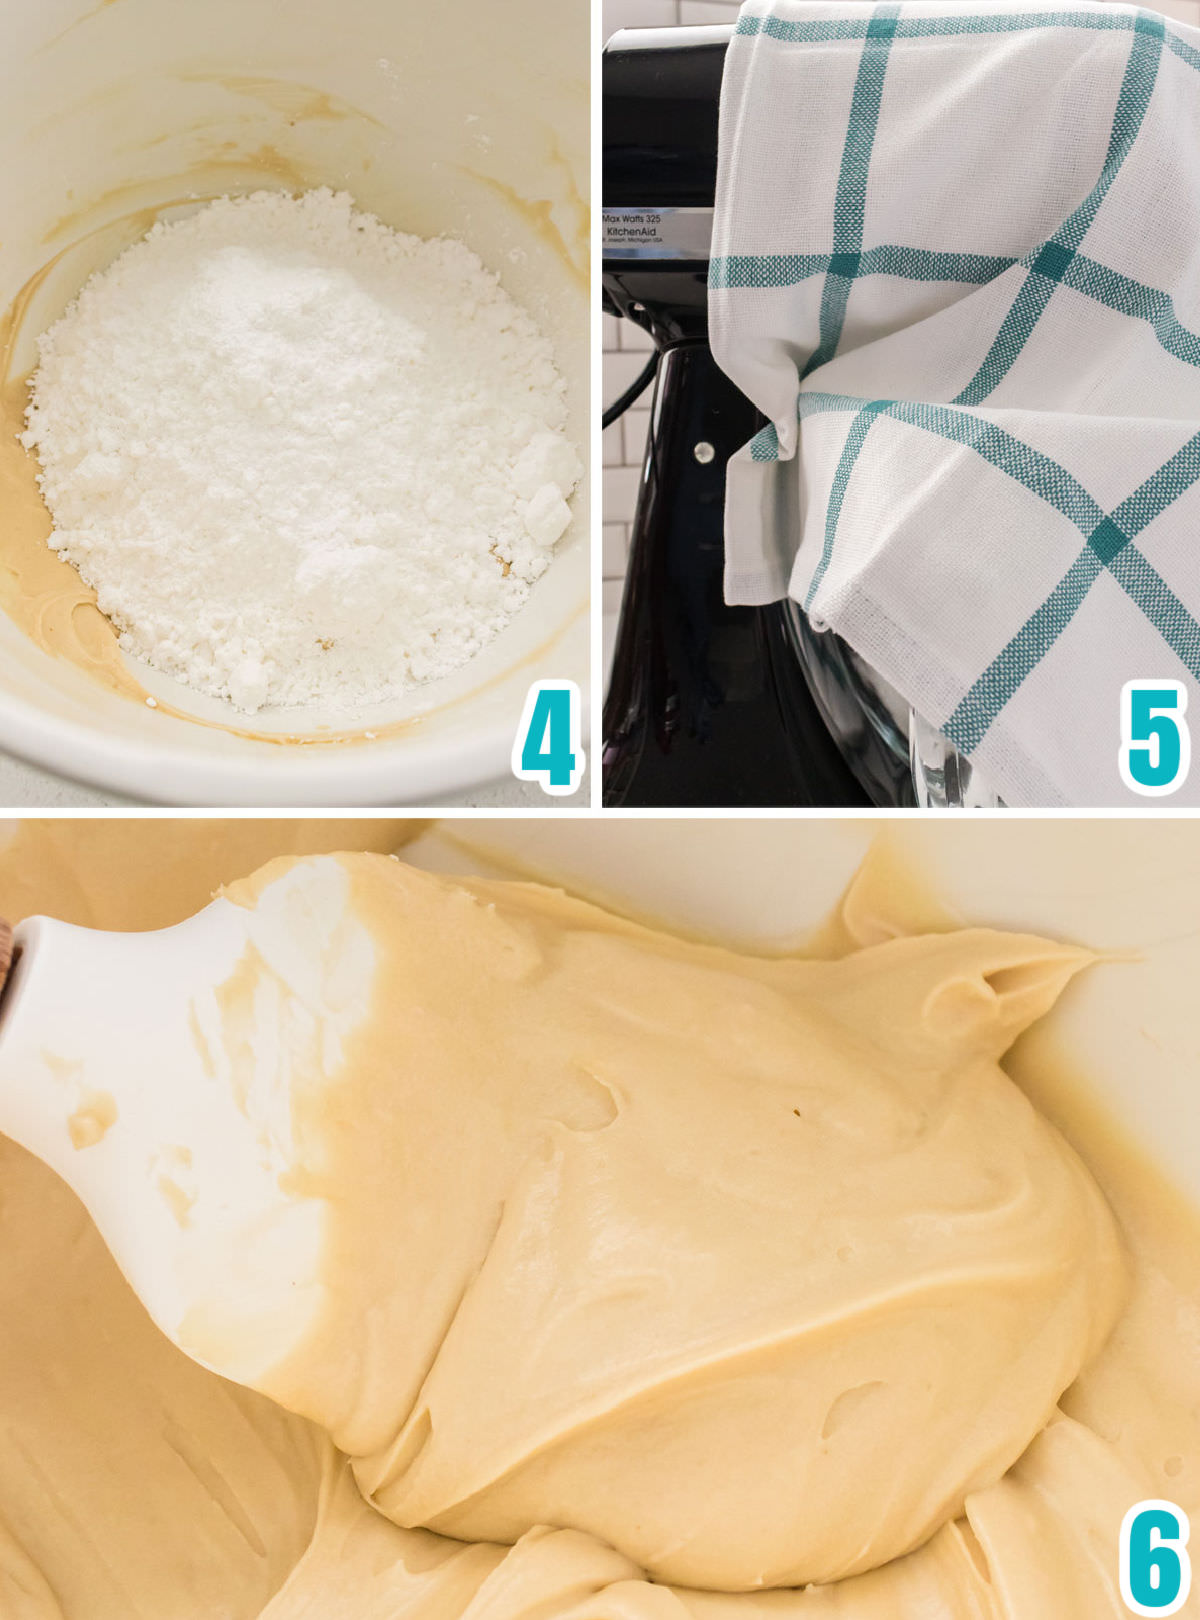 Collage image showing the steps for adding the powdered sugar to the butter/cream cheese mixture.